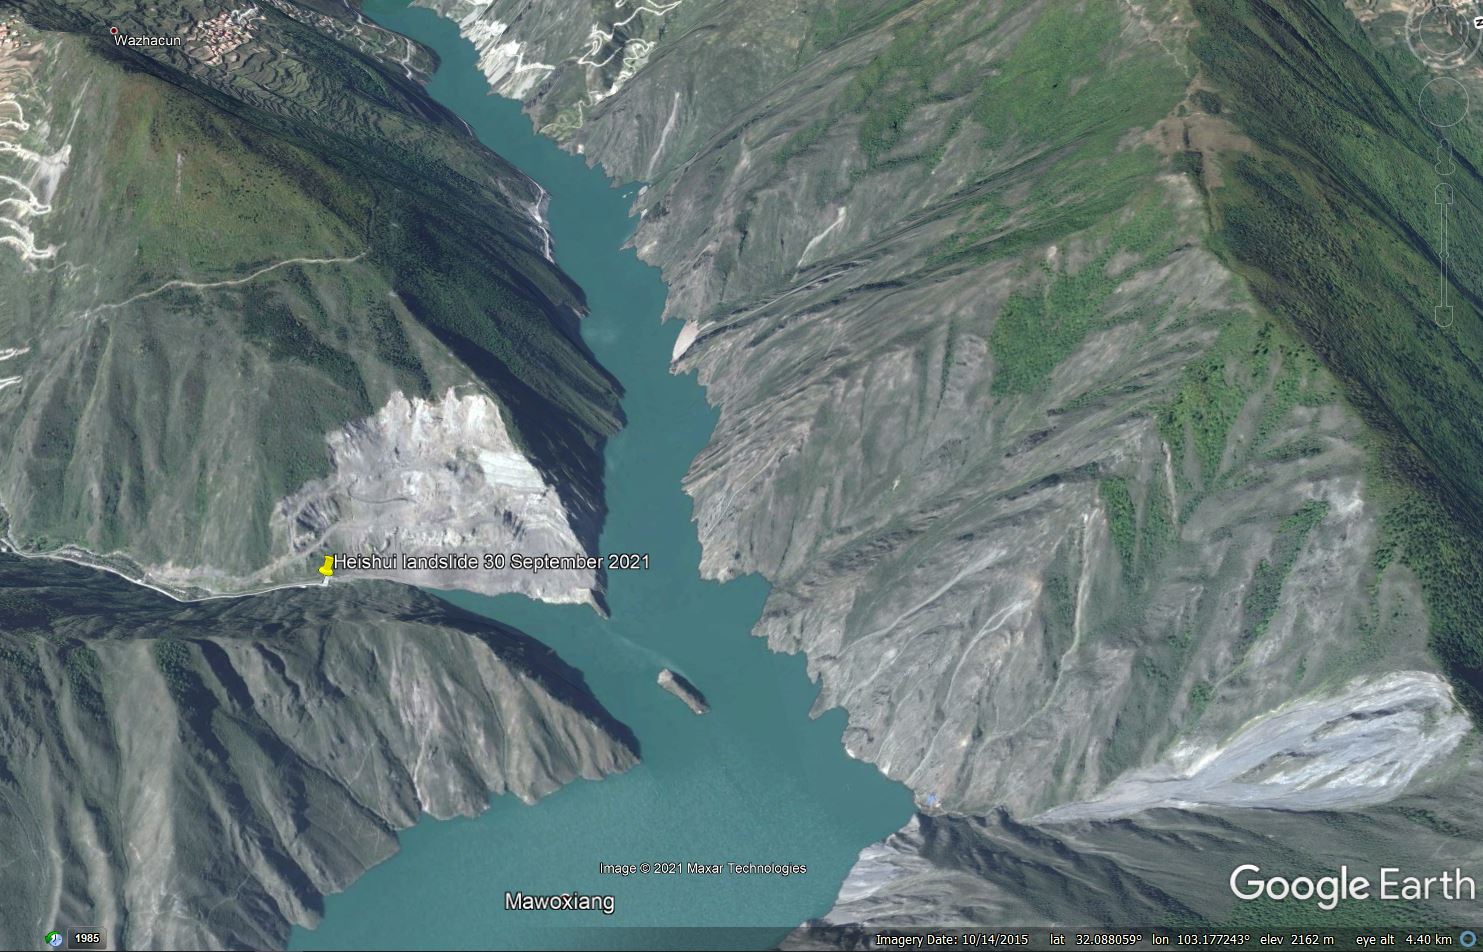 Google Earth image of the location of the 30 September 2021 rockslide at Heishui in Sichuan Province, China.